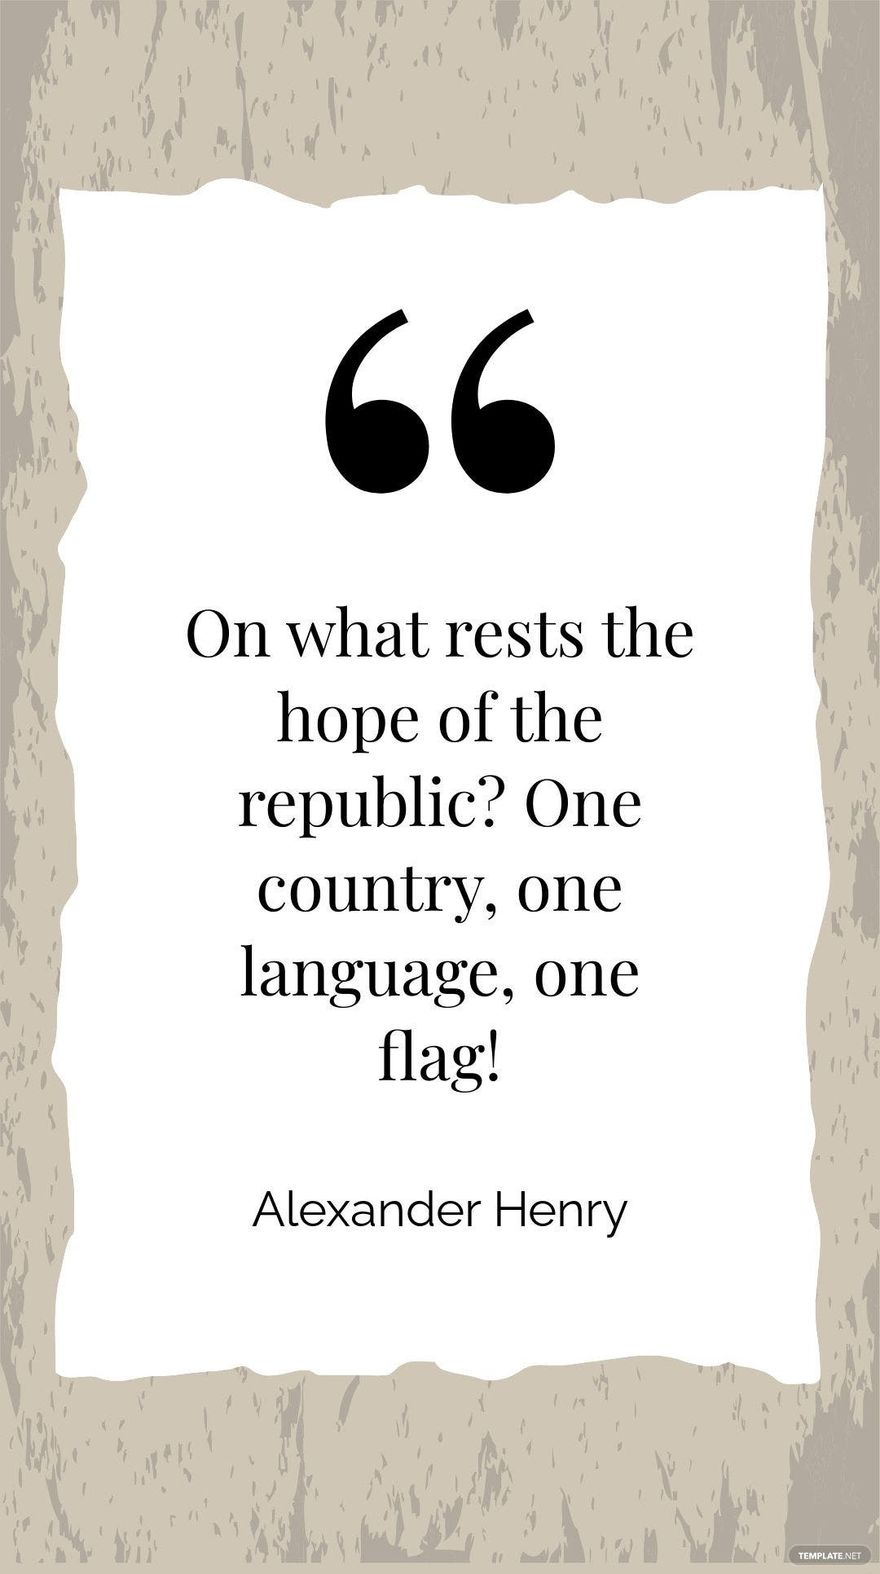  Alexander Henry - On what rests the hope of the republic? One country, one language, one flag!